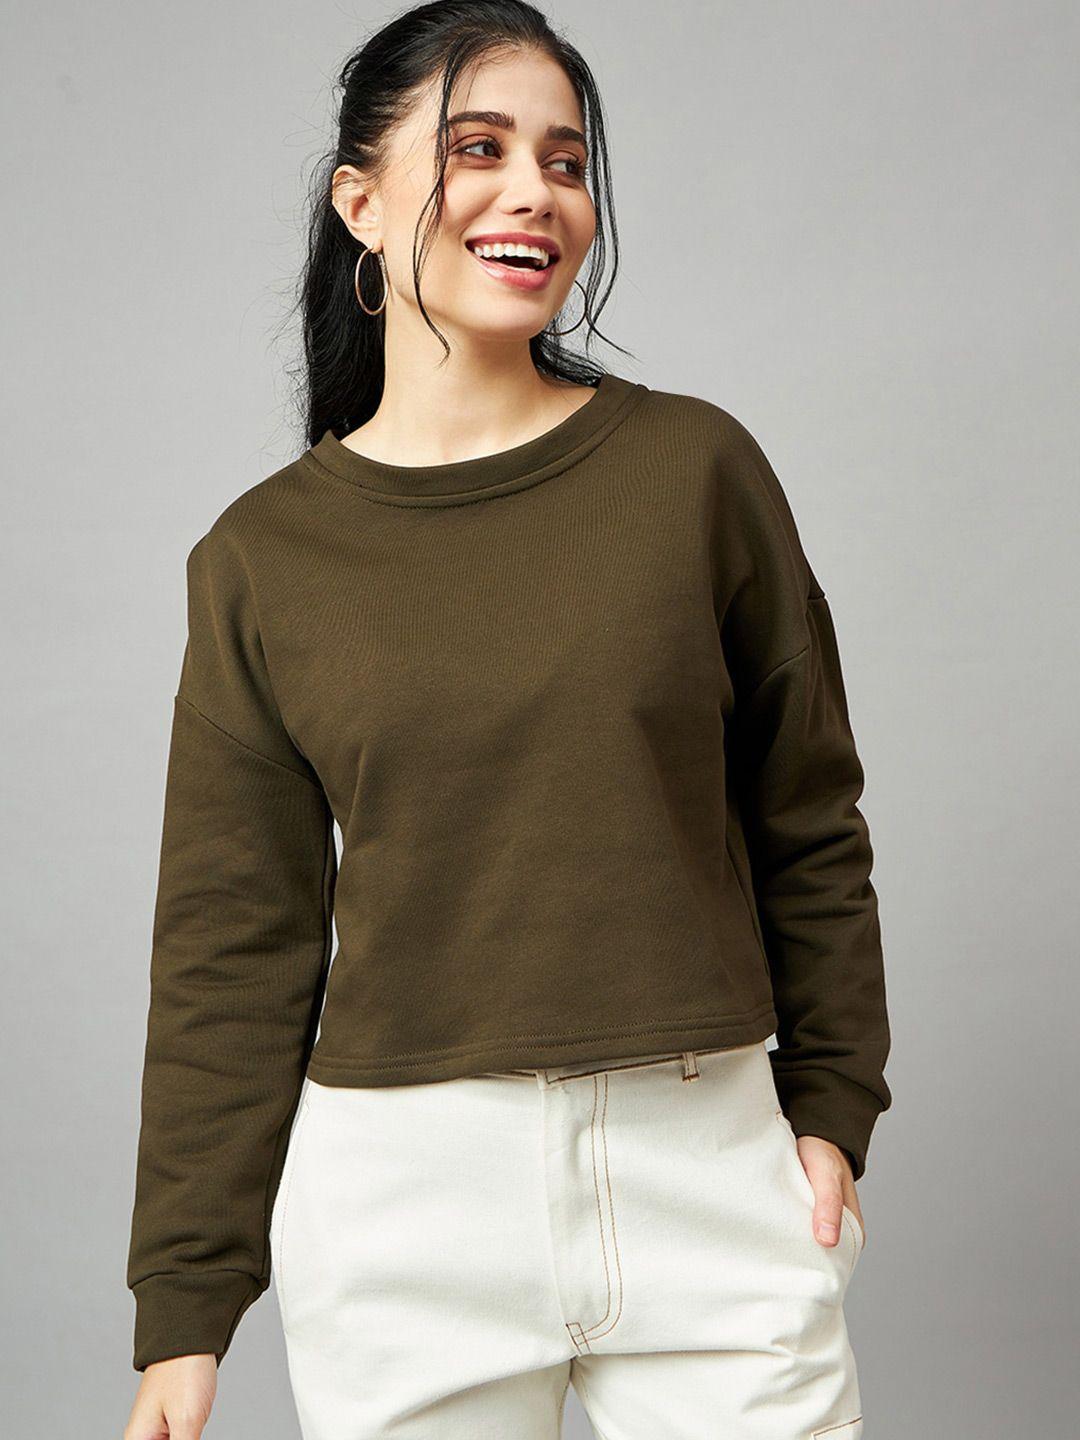 mast & harbour olive green long sleeves cotton pullover